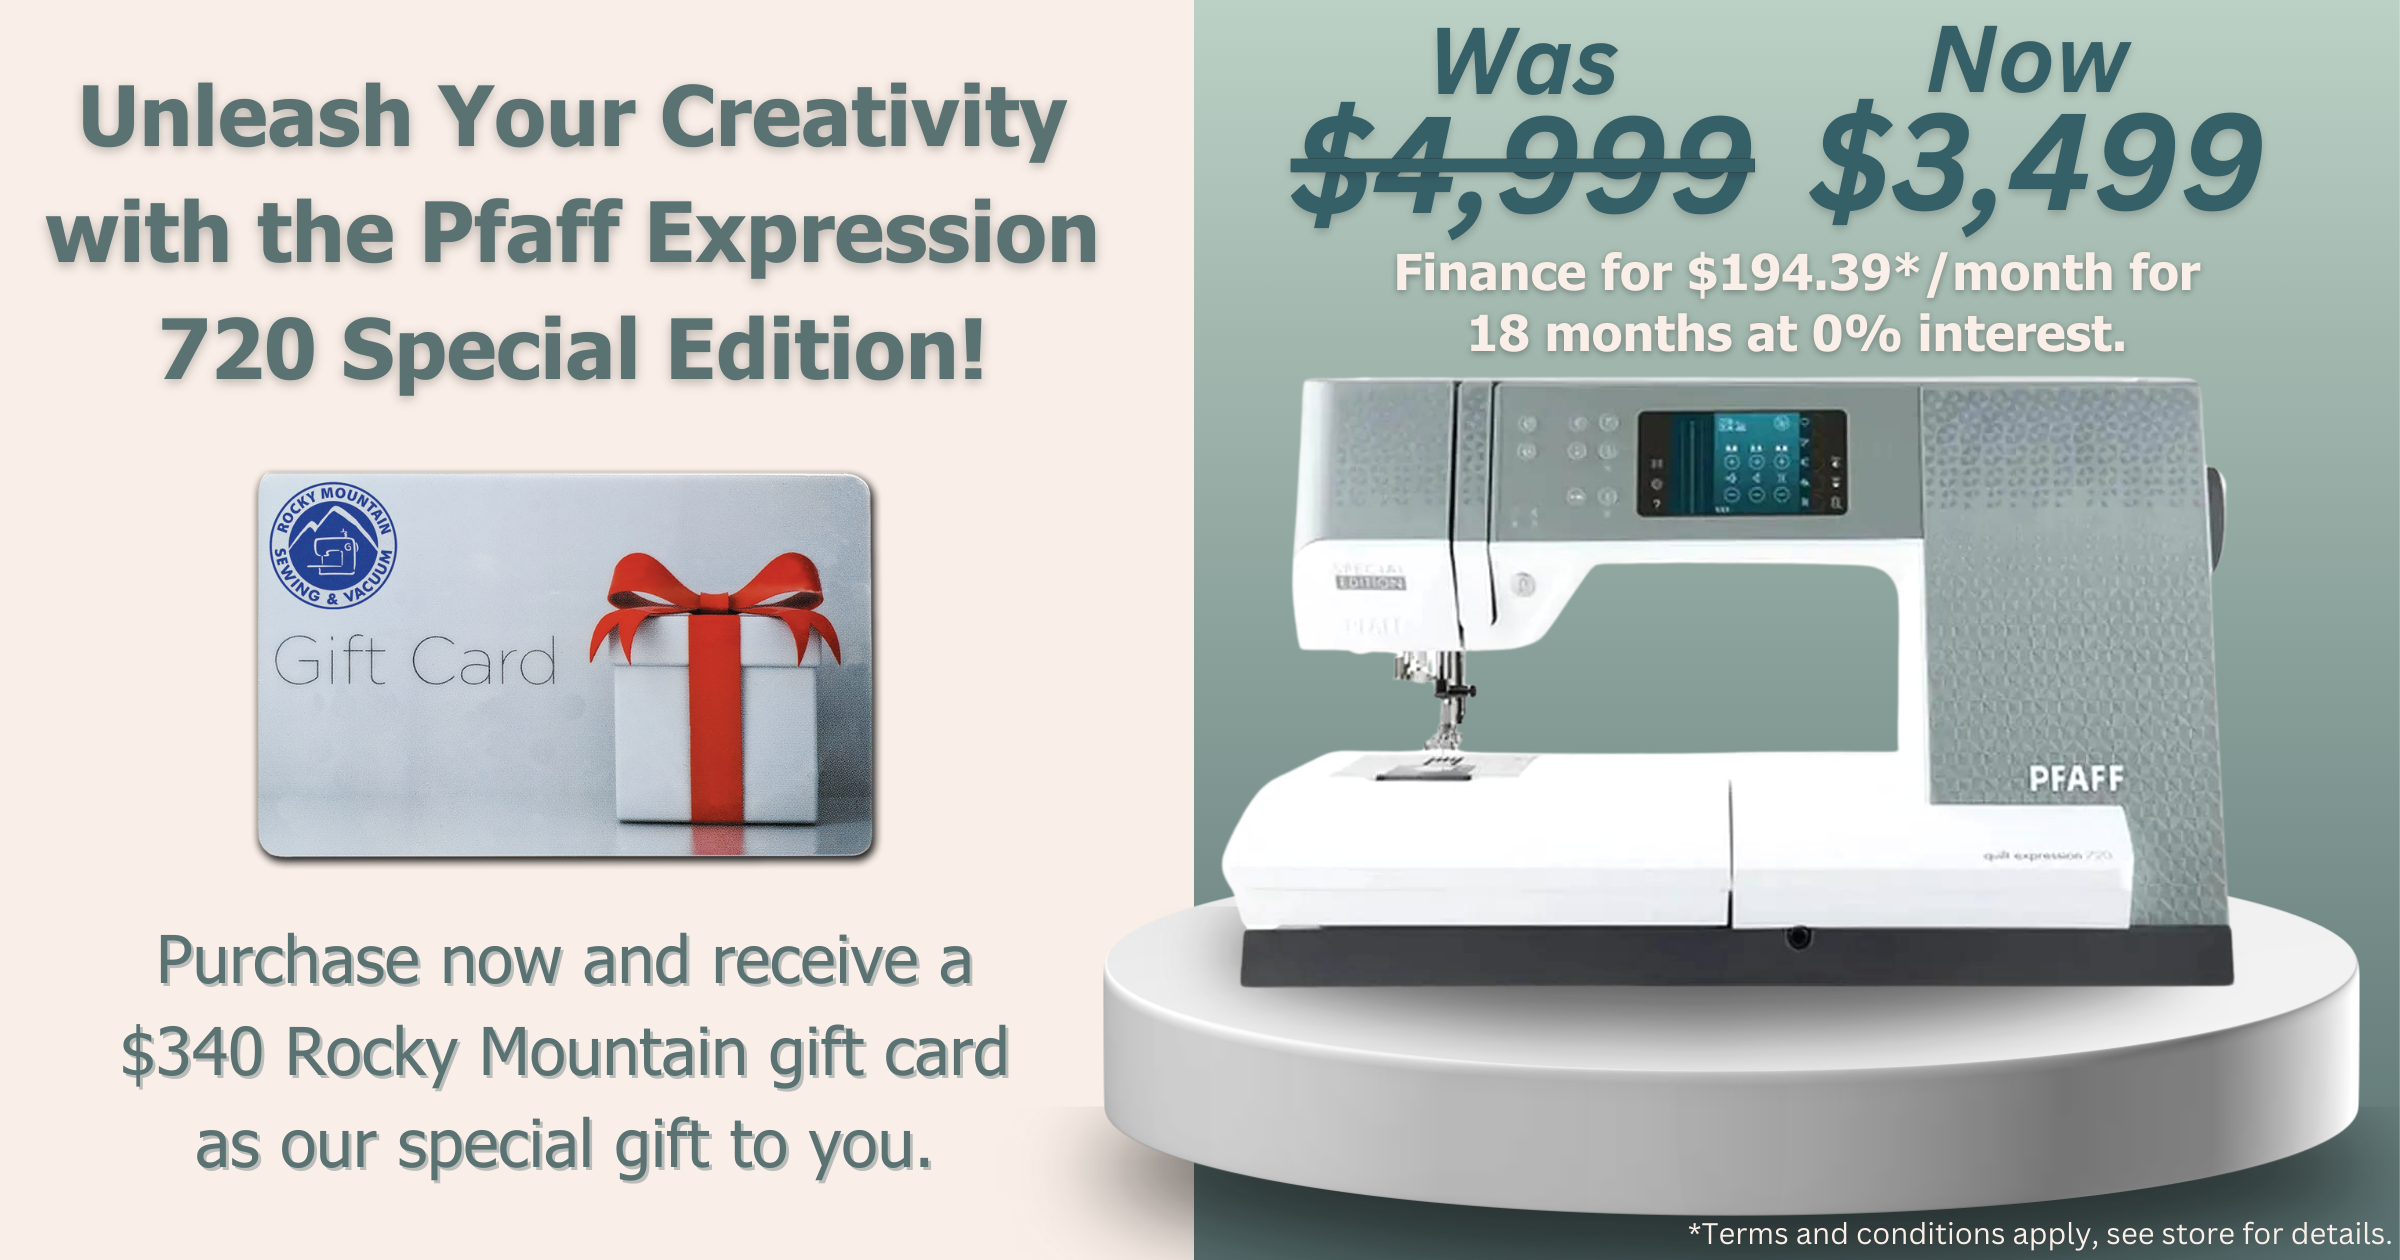 Purchase a PFAFF 720 Expression 720 Special Edition now and receive a $340 Rocky Mountain gift card as our special gift to you.